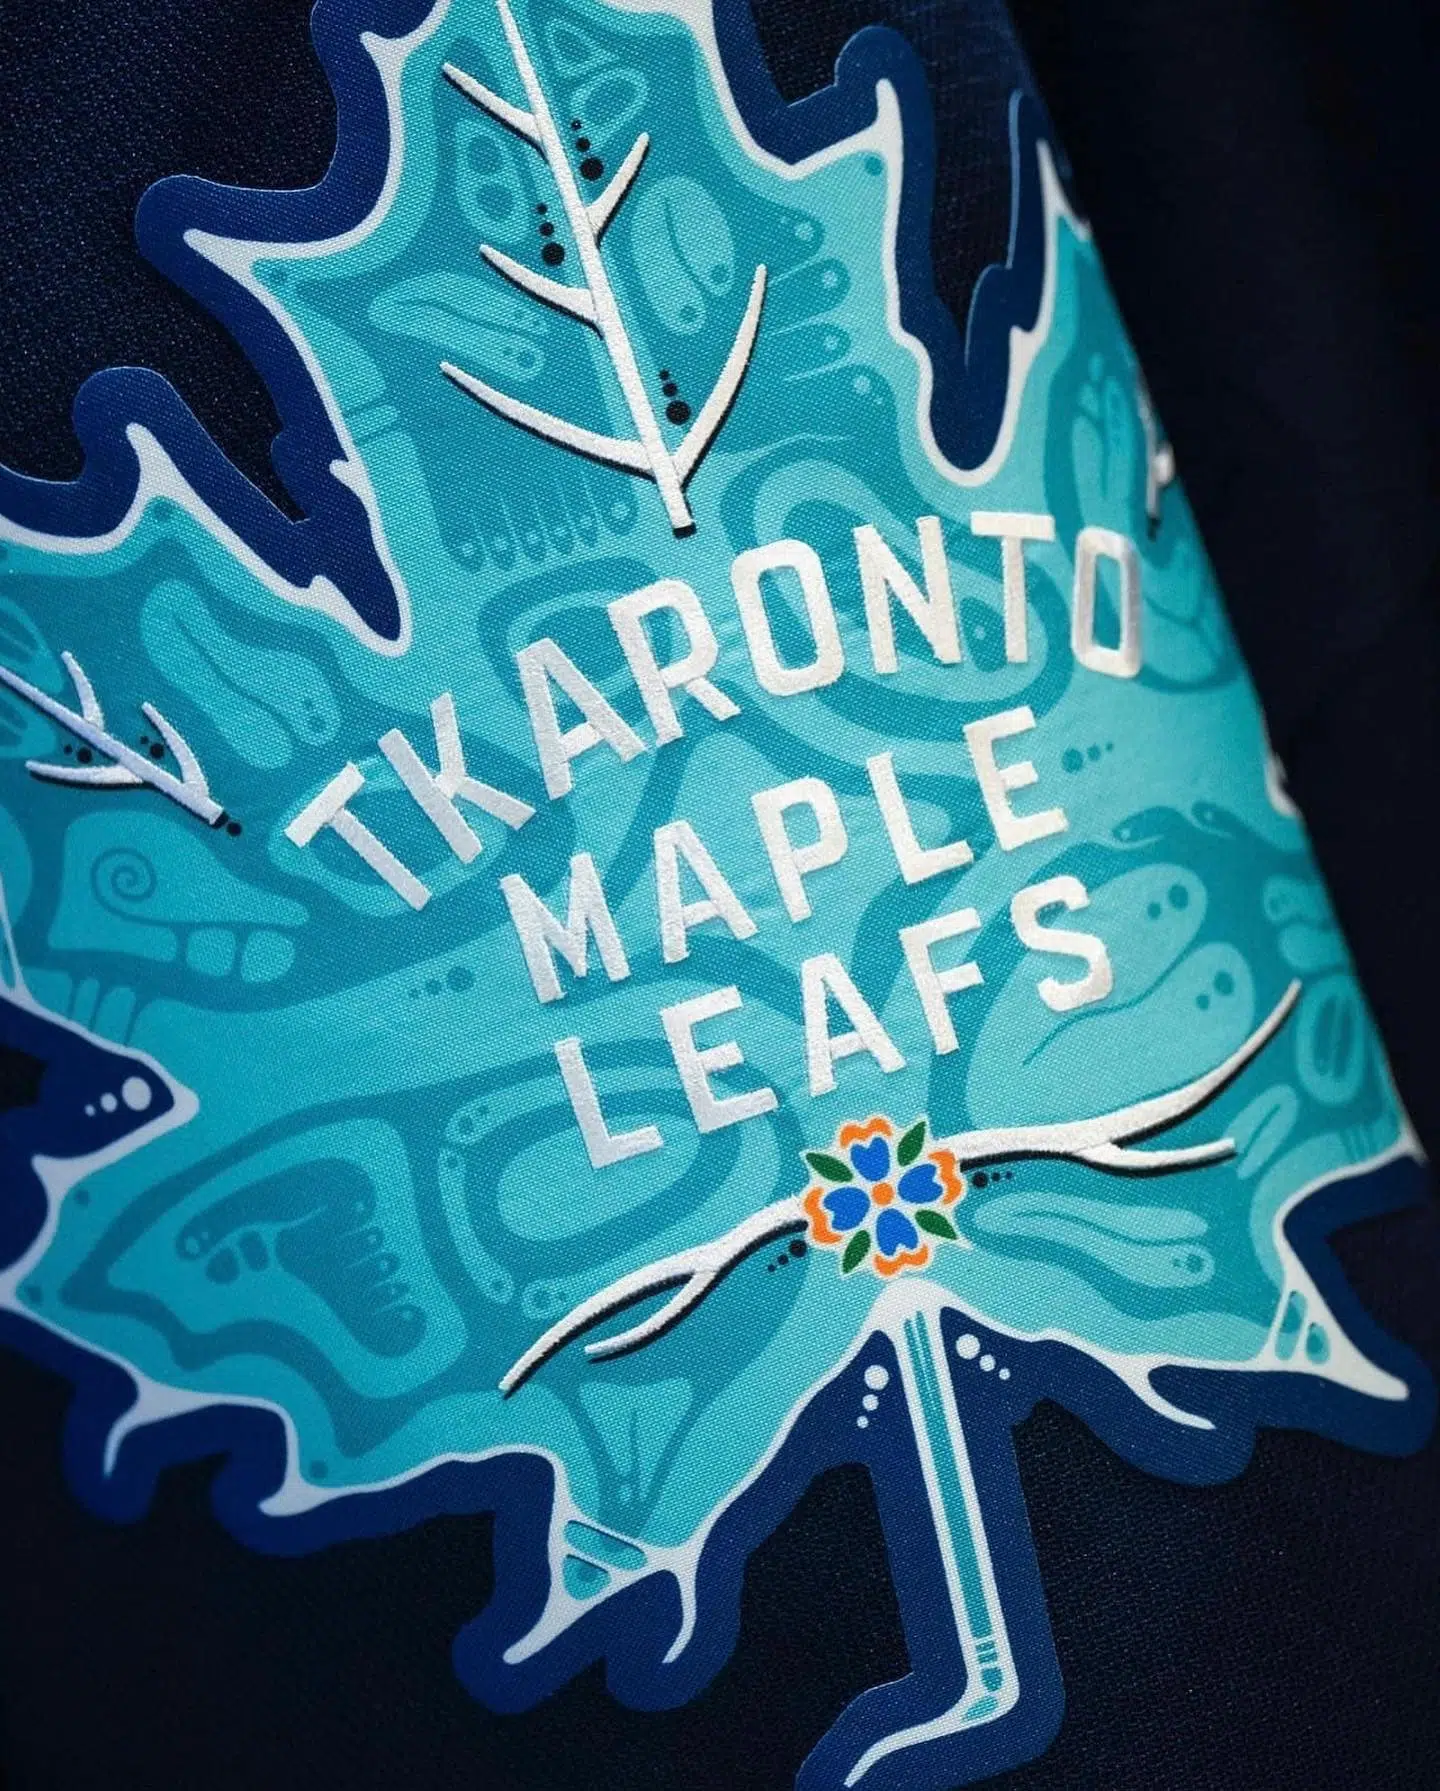 First Nations artists score big with beaded medallions and jersey design  for Toronto Maple Leafs